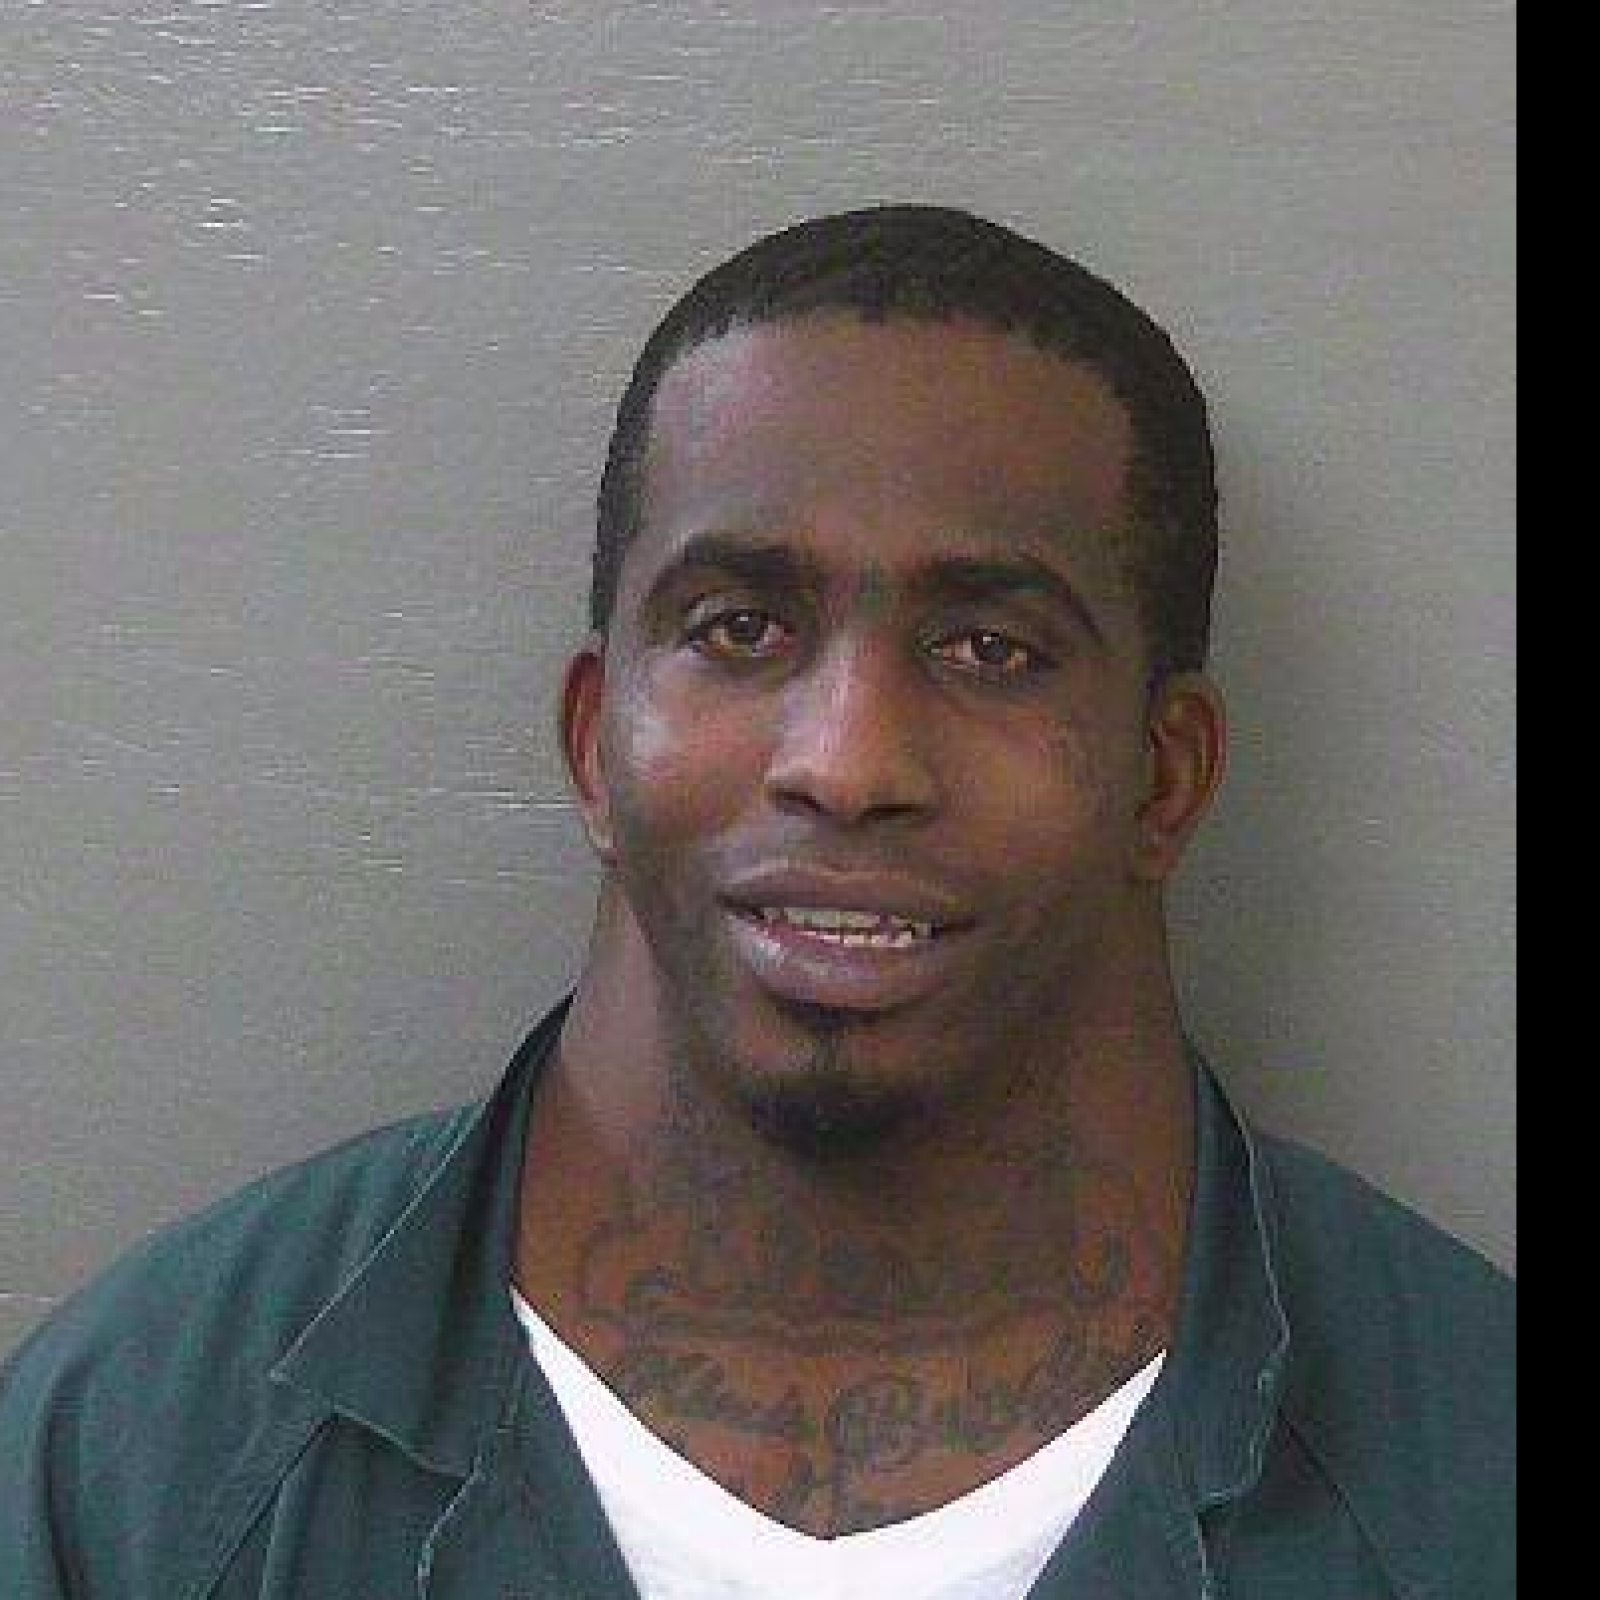 neck-guy-charles-dion-mcdowell.png